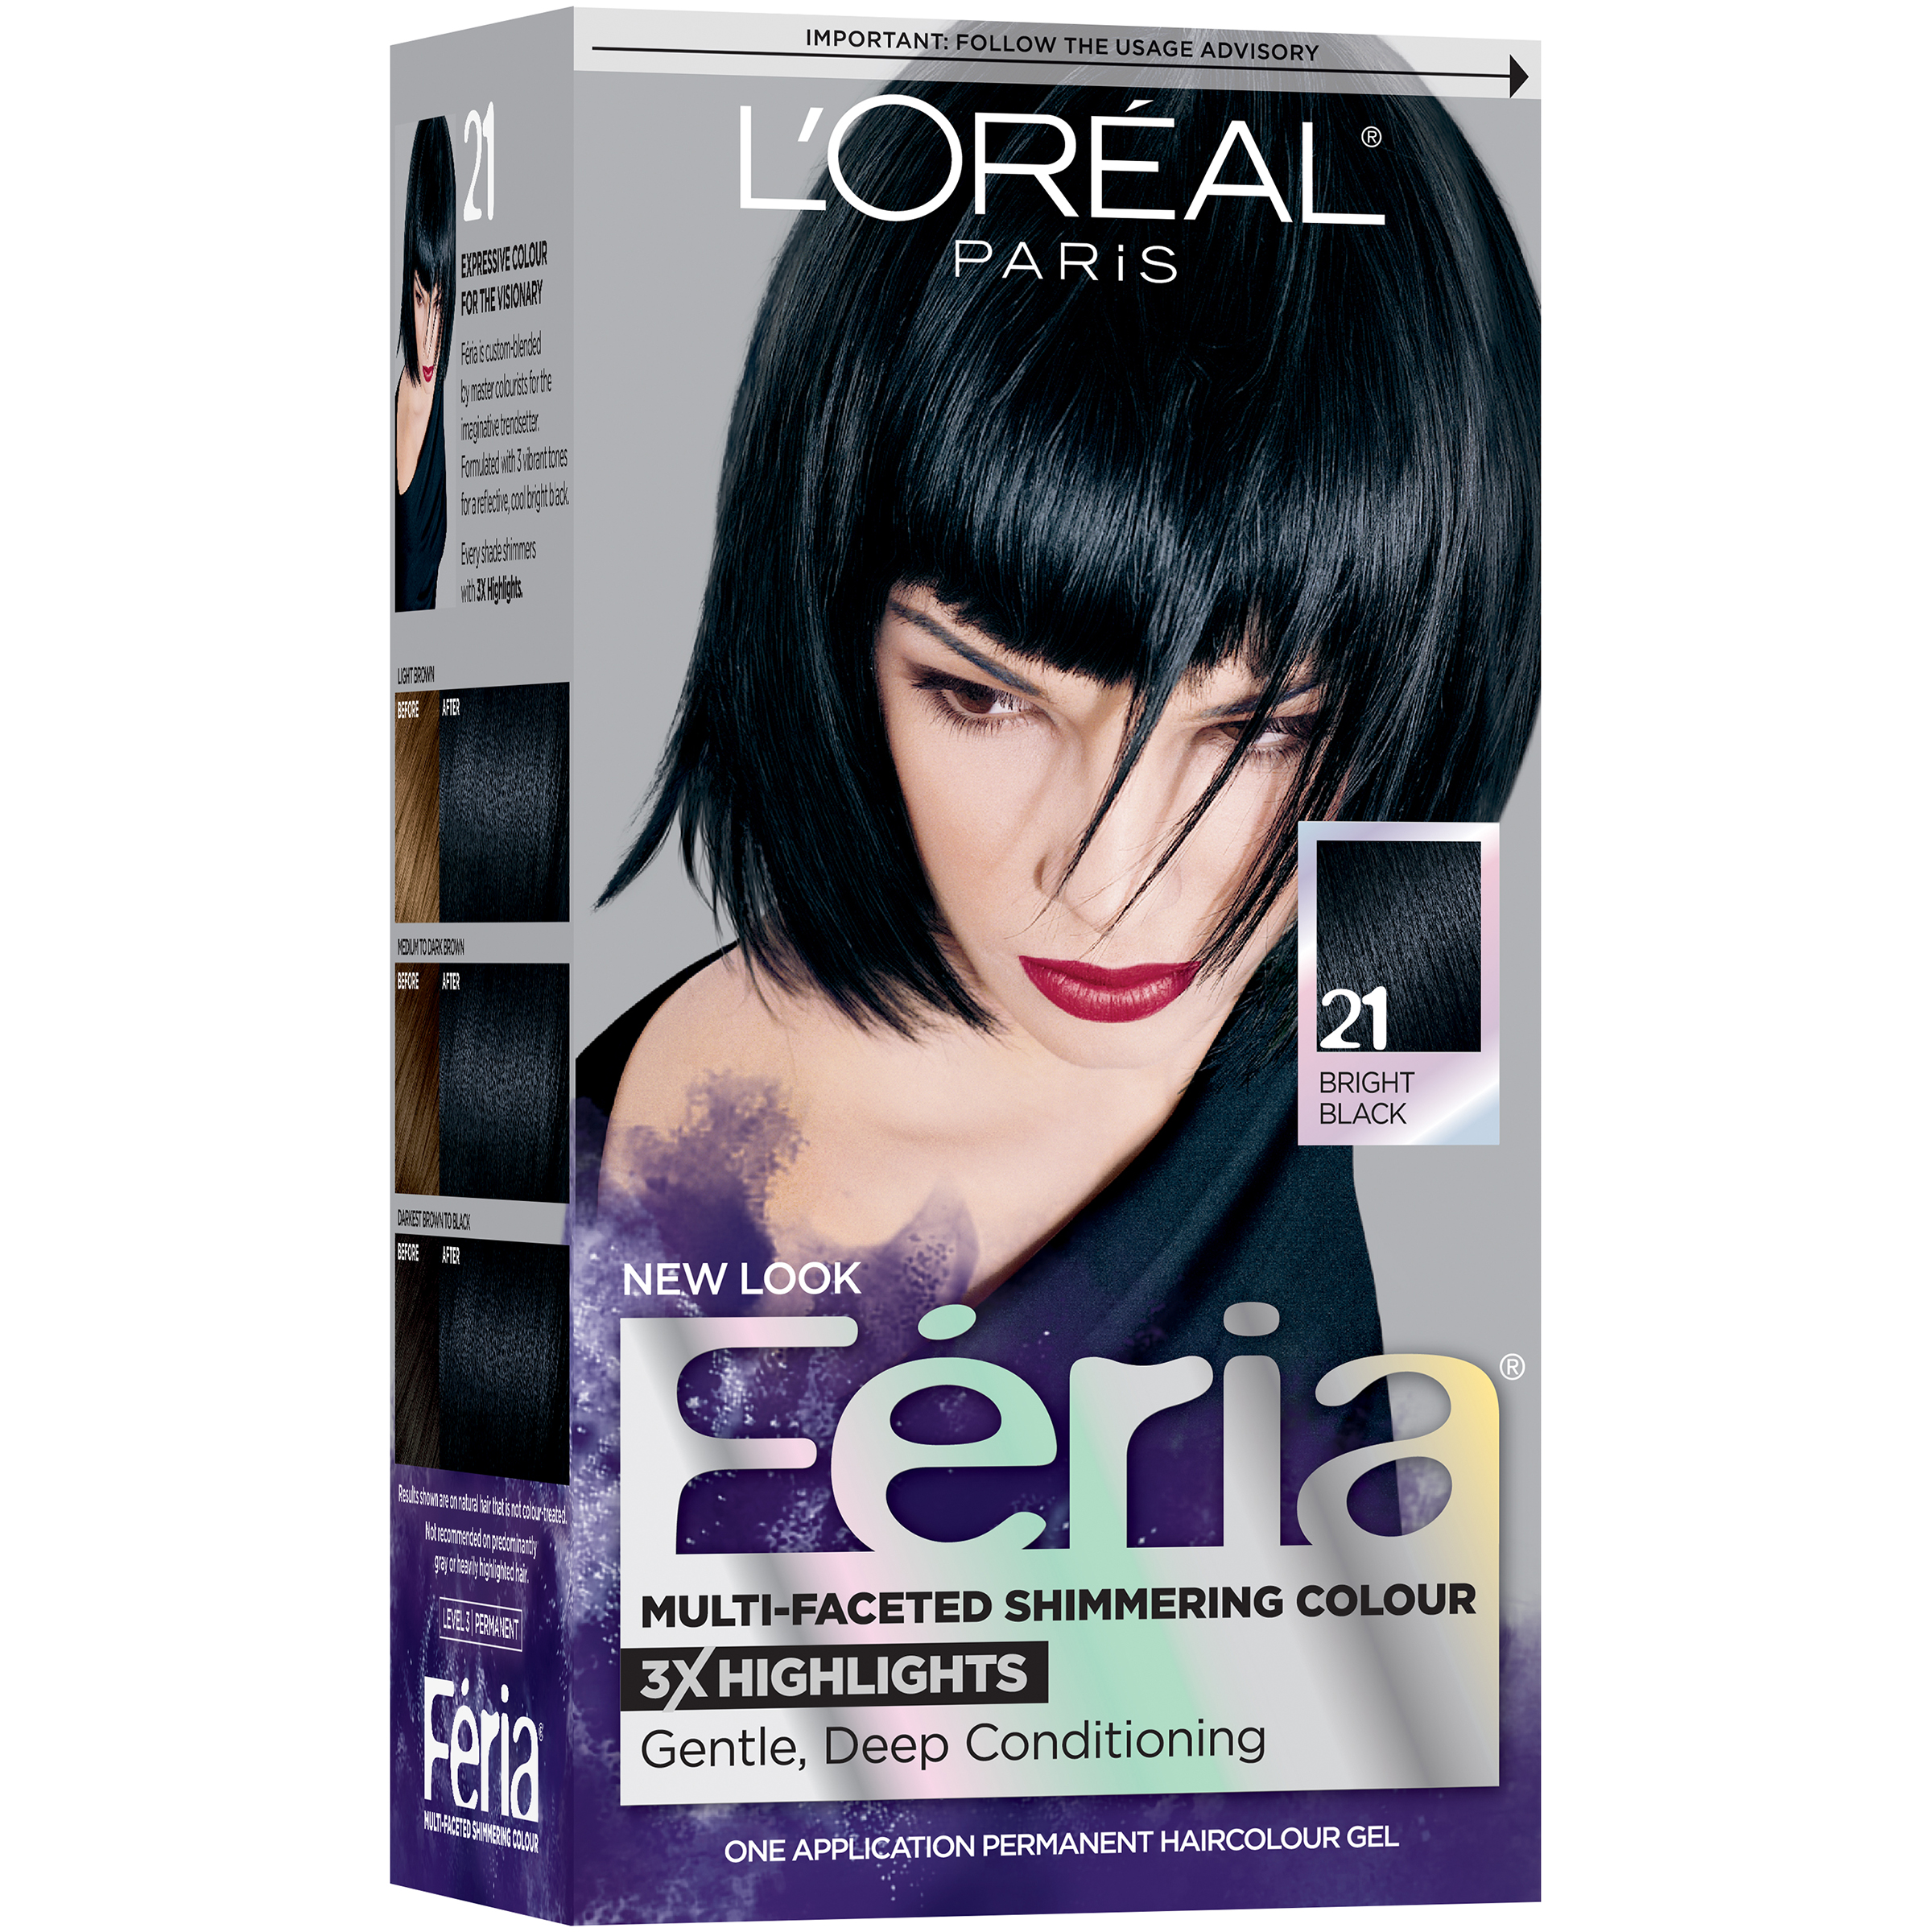 L'Oreal  Paris Feria Multi-Faceted Shimmering Permanent Hair Color, 21 Starry Night (Bright Black), 1 kit